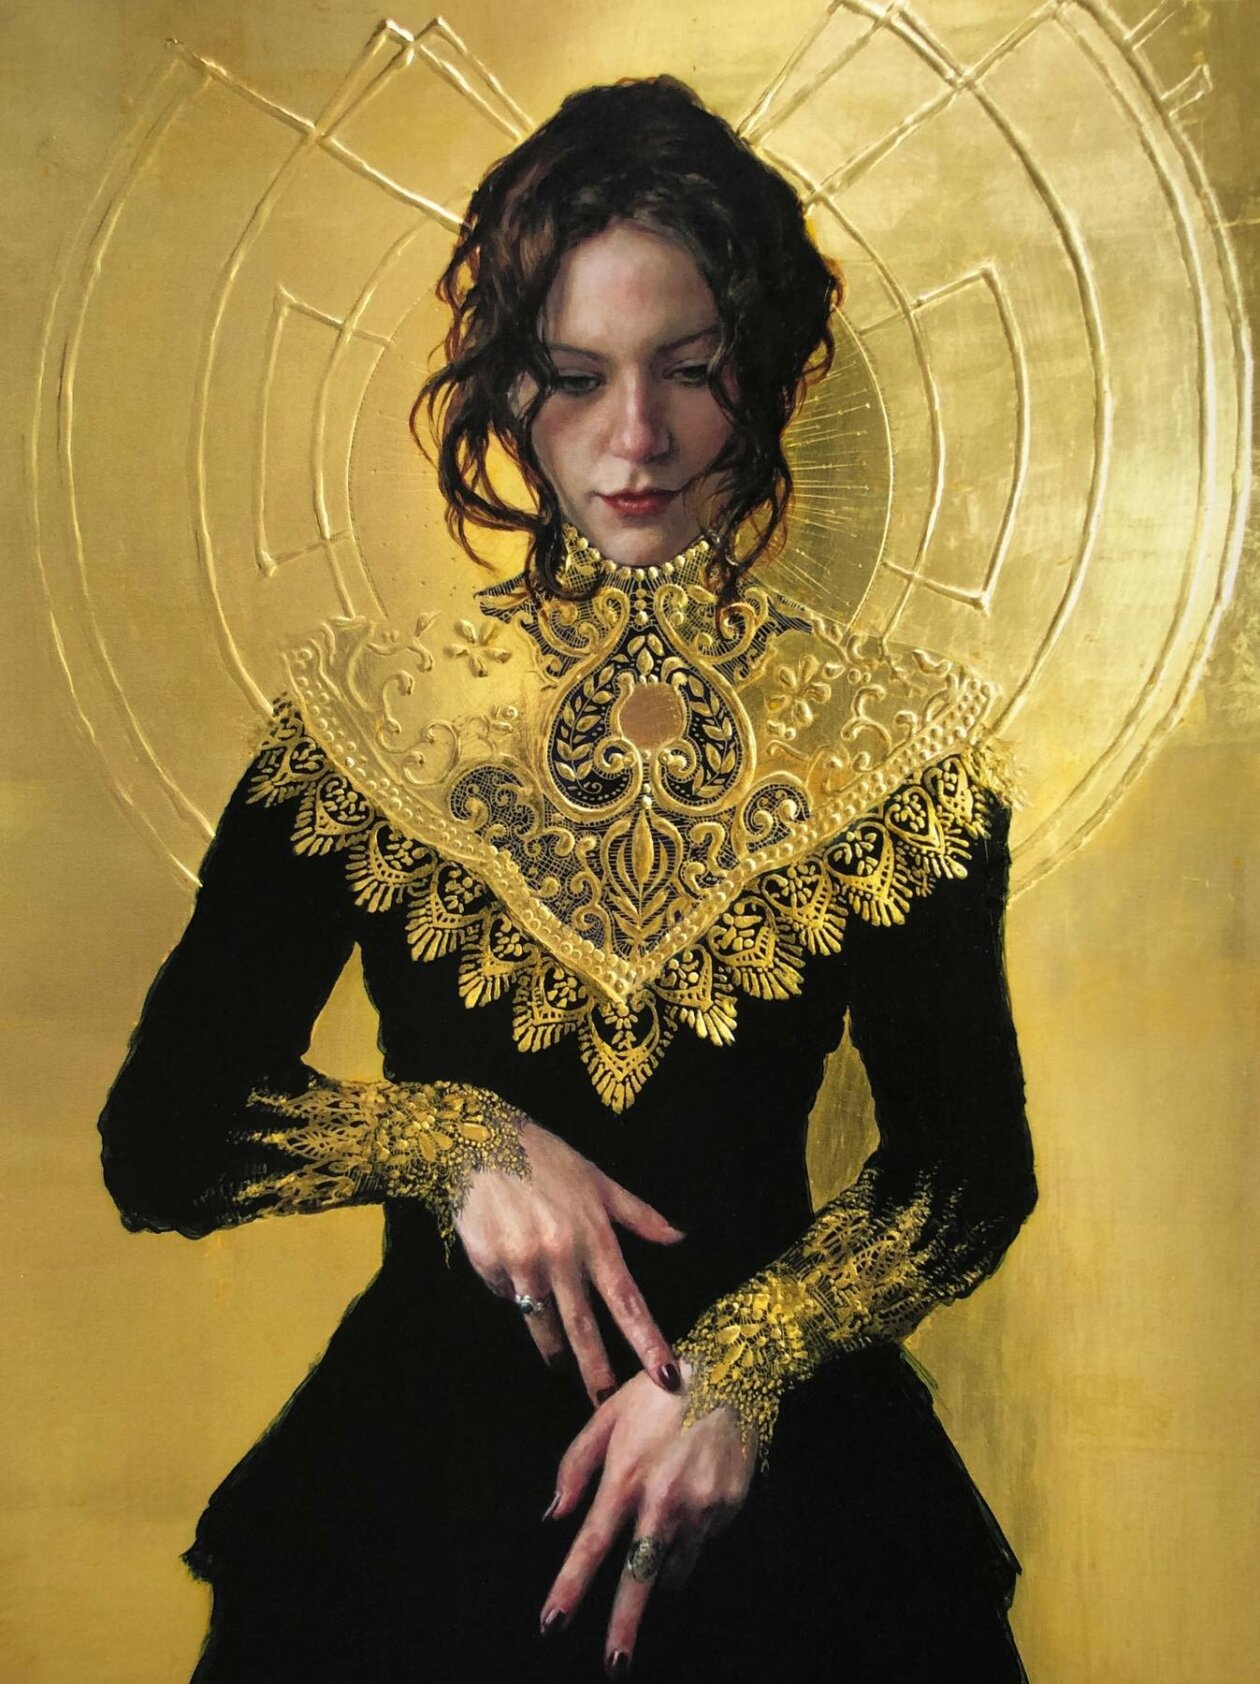 Realistic Figurative Paintings With Gold Ornaments By Stephanie Rew (16)